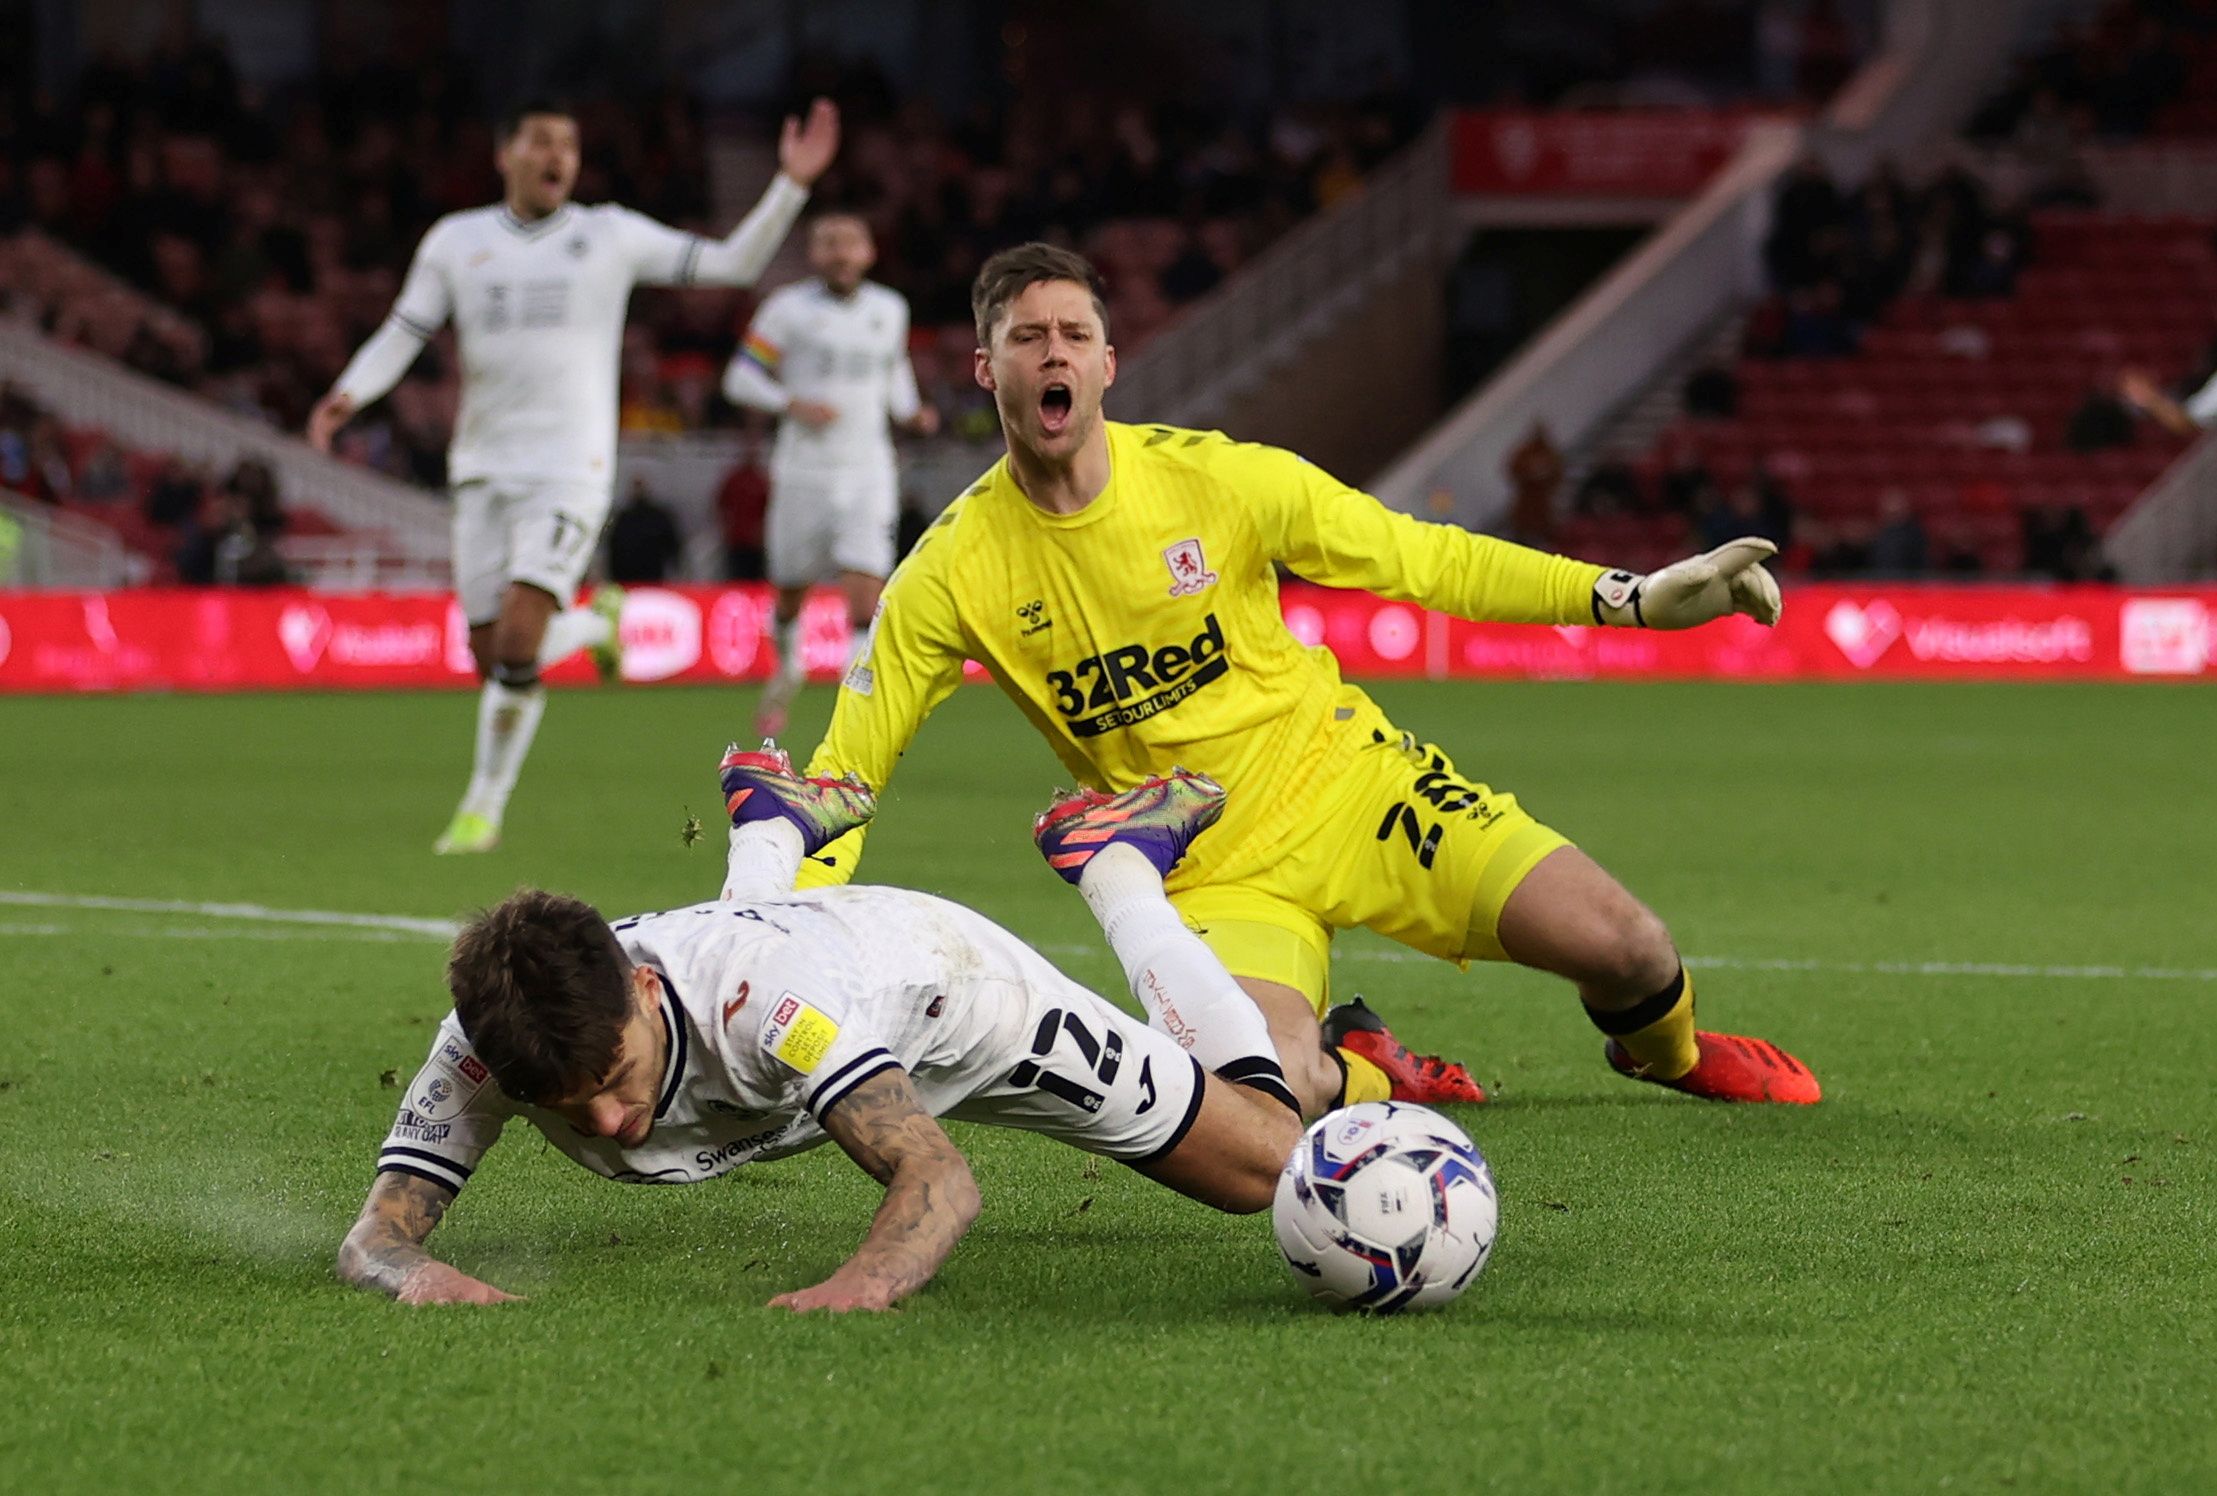 Soccer Football - Middlesbrough v Swansea City - Riverside Stadium, Middlesbrough, Britain - December 4, 2021  Middlesbrough's Luke Daniels in action with Swansea City's Jamie Paterson   Action Images/John Clifton  EDITORIAL USE ONLY. No use with unauthorized audio, video, data, fixture lists, club/league logos or 